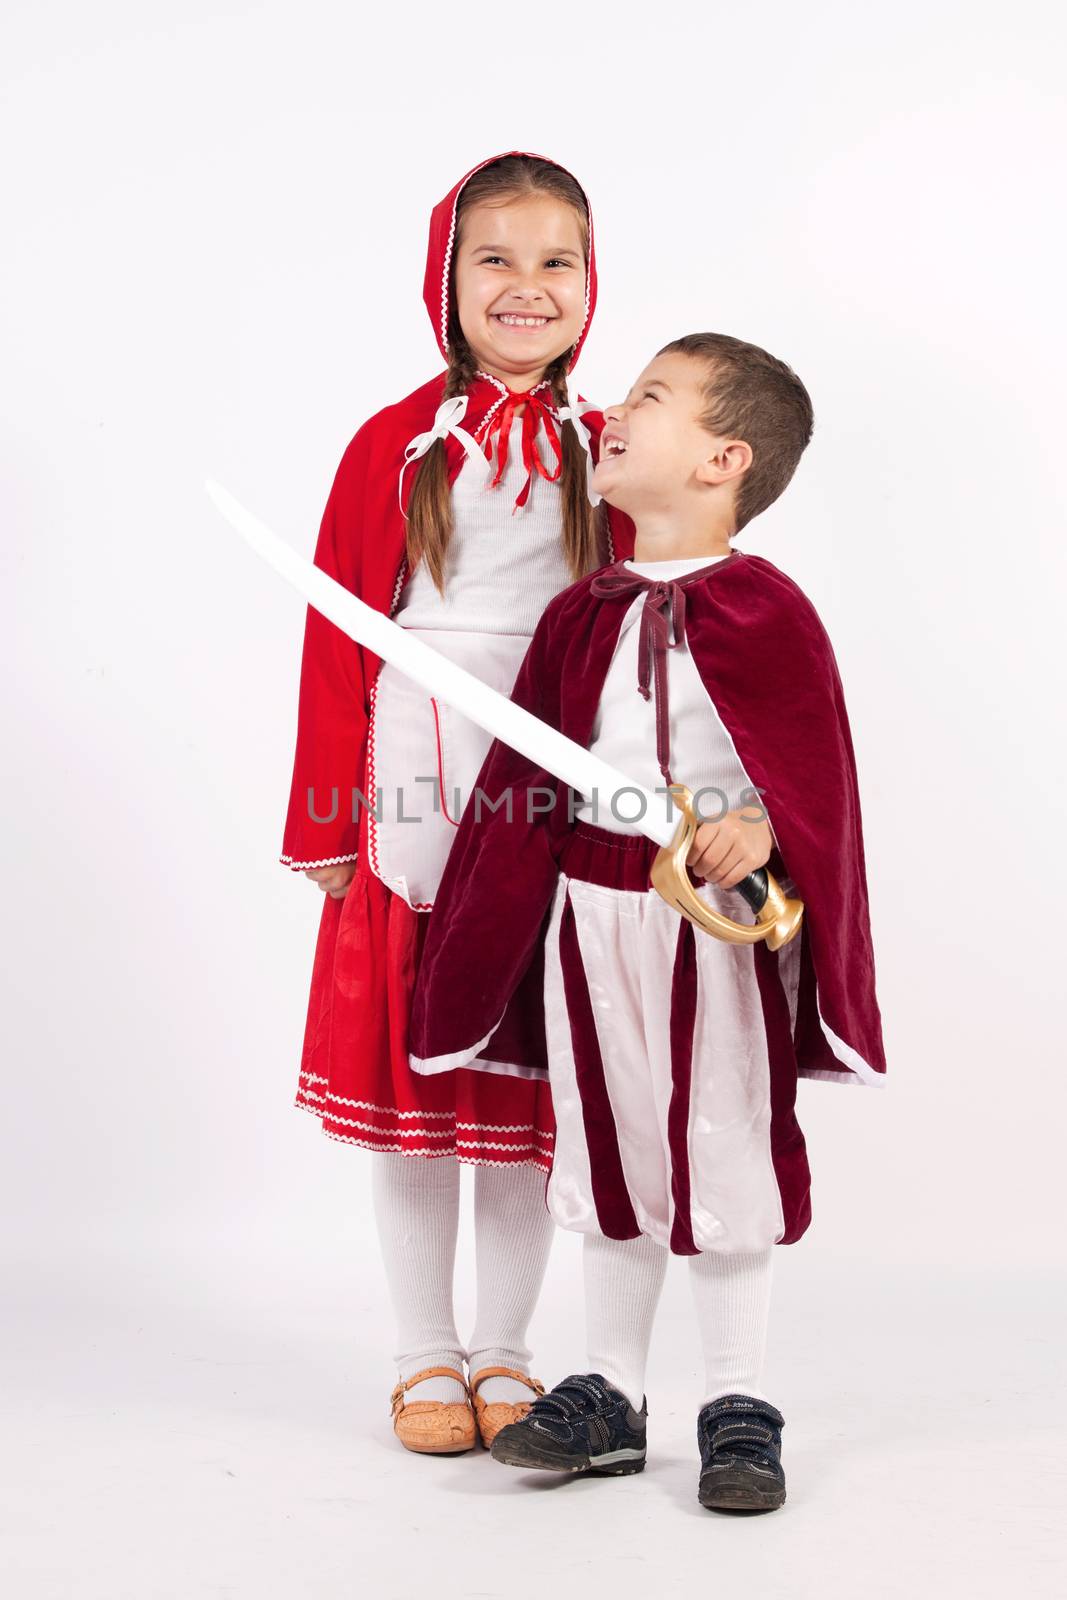 Red Riding Hood, and the little prince with sword